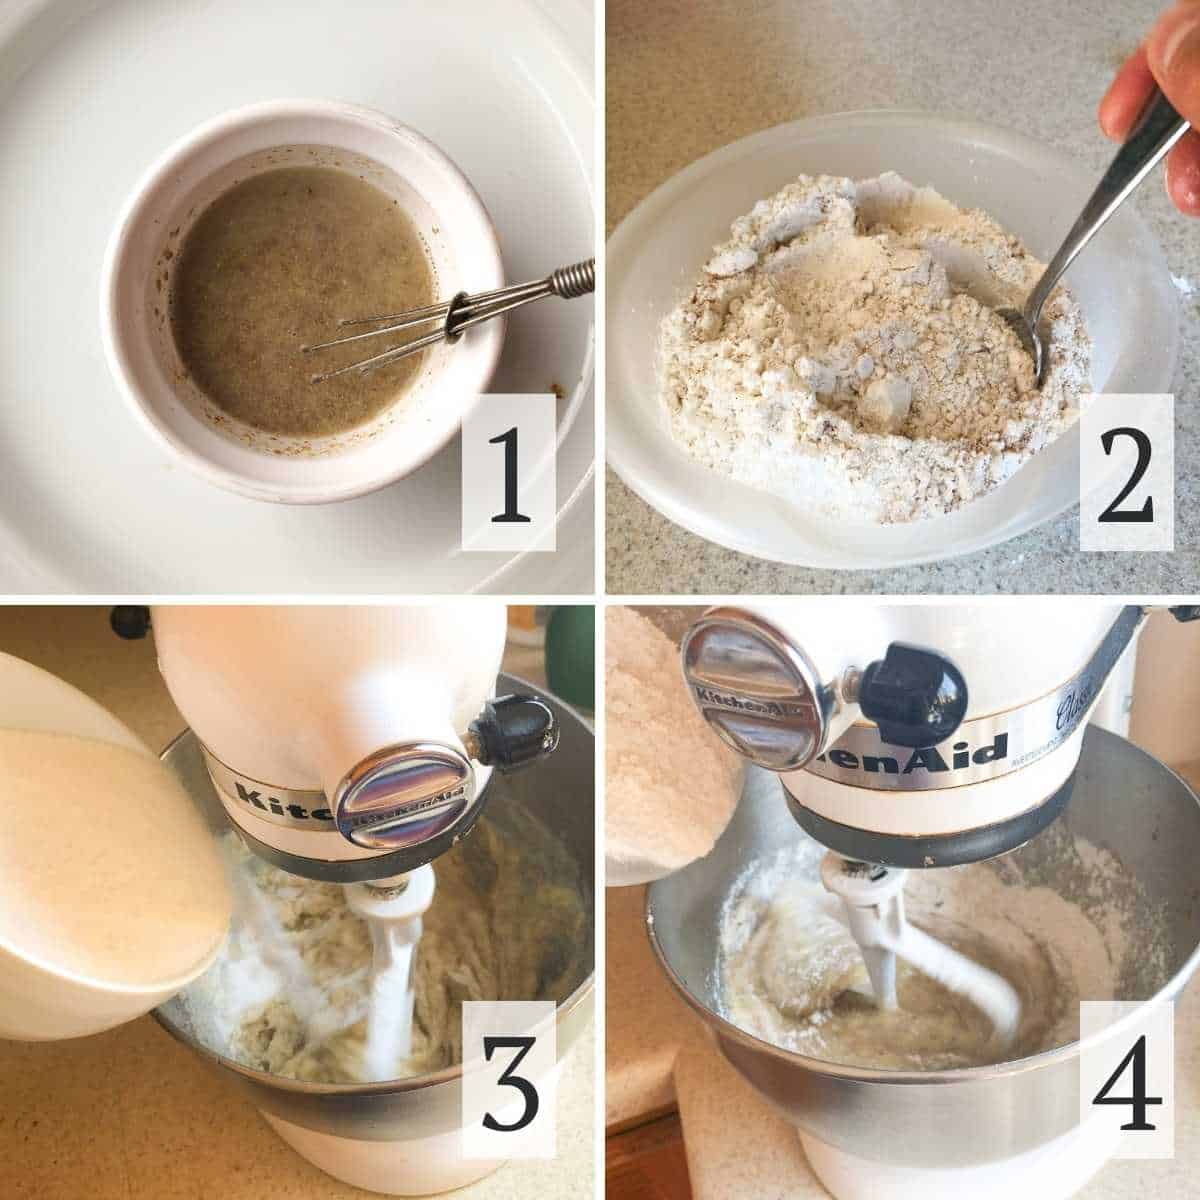 Steps for mixing the gluten free chocolate chip banana muffin batter.